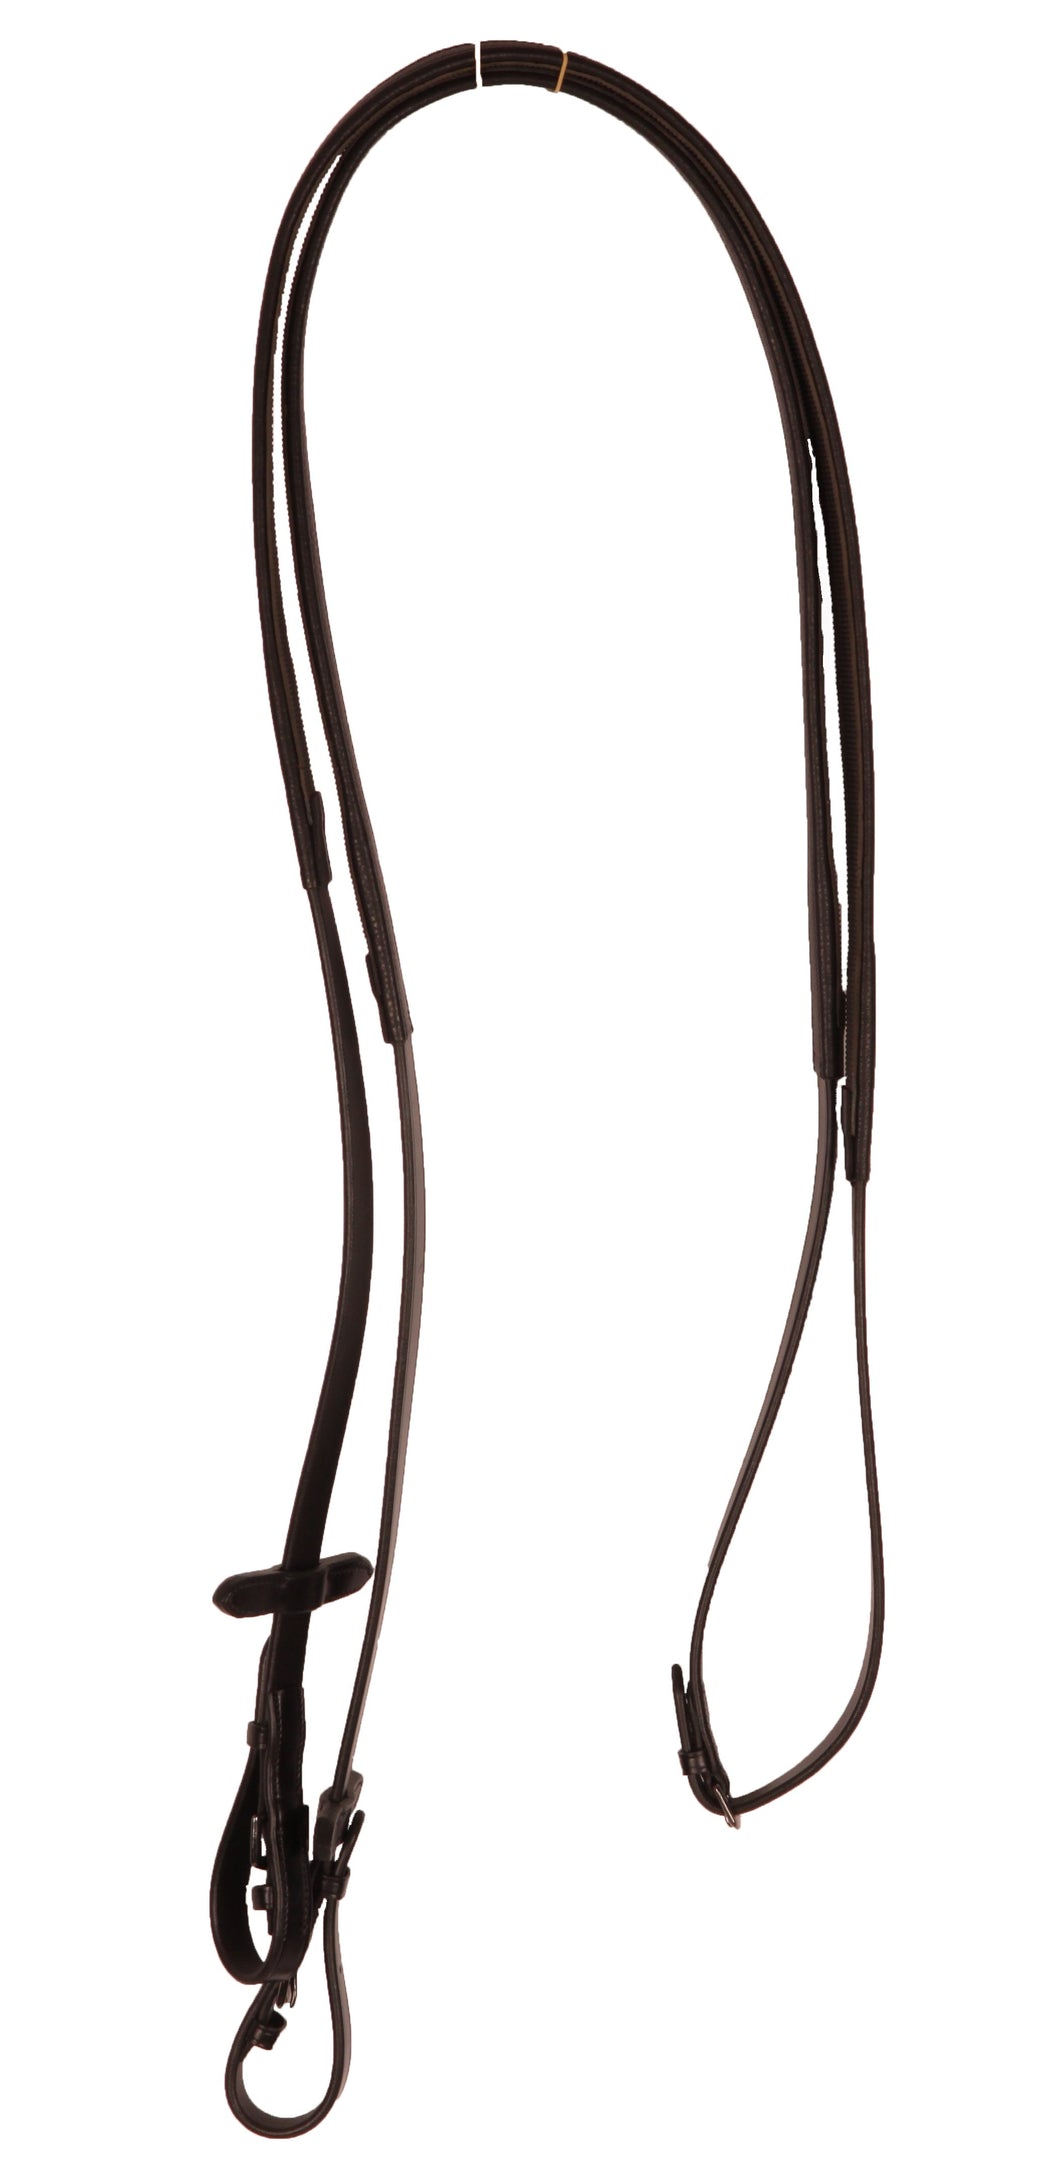 Kingsley Flat Rubber Backed Leather Reins